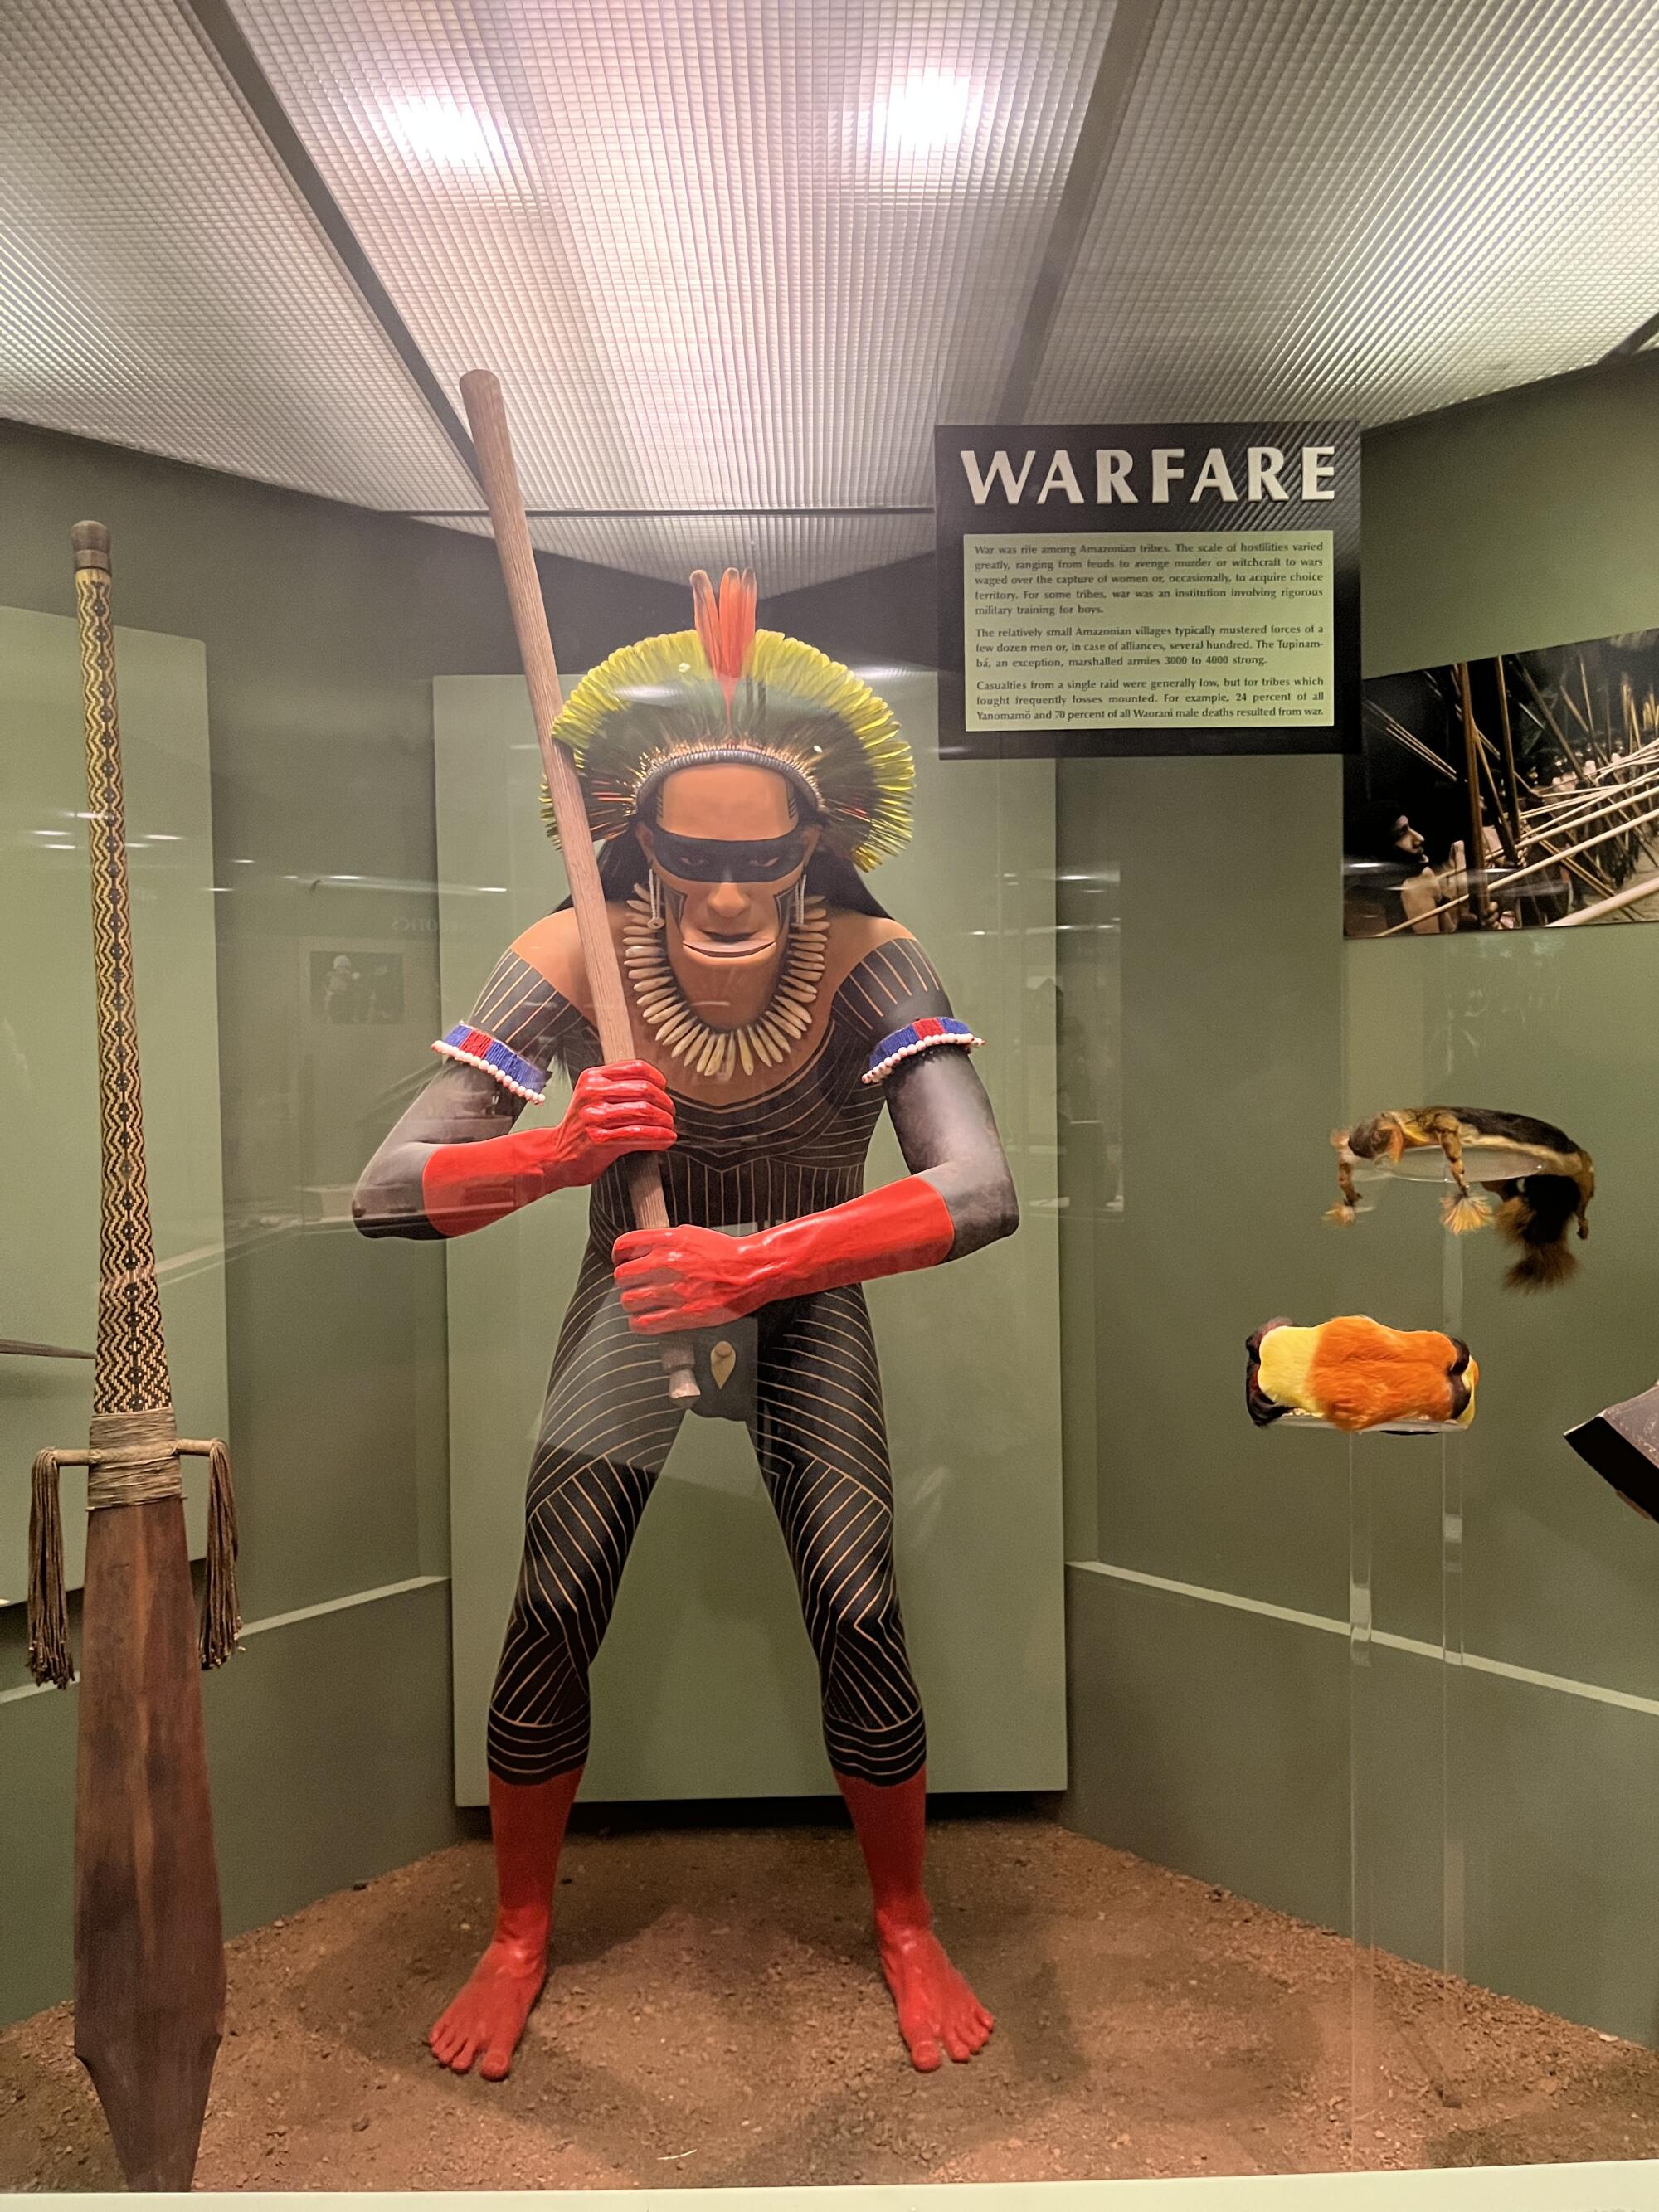 A view of a diorama shows an Indigenous Amazon man in face paint wielding a club under a sign that reads "WARFARE"